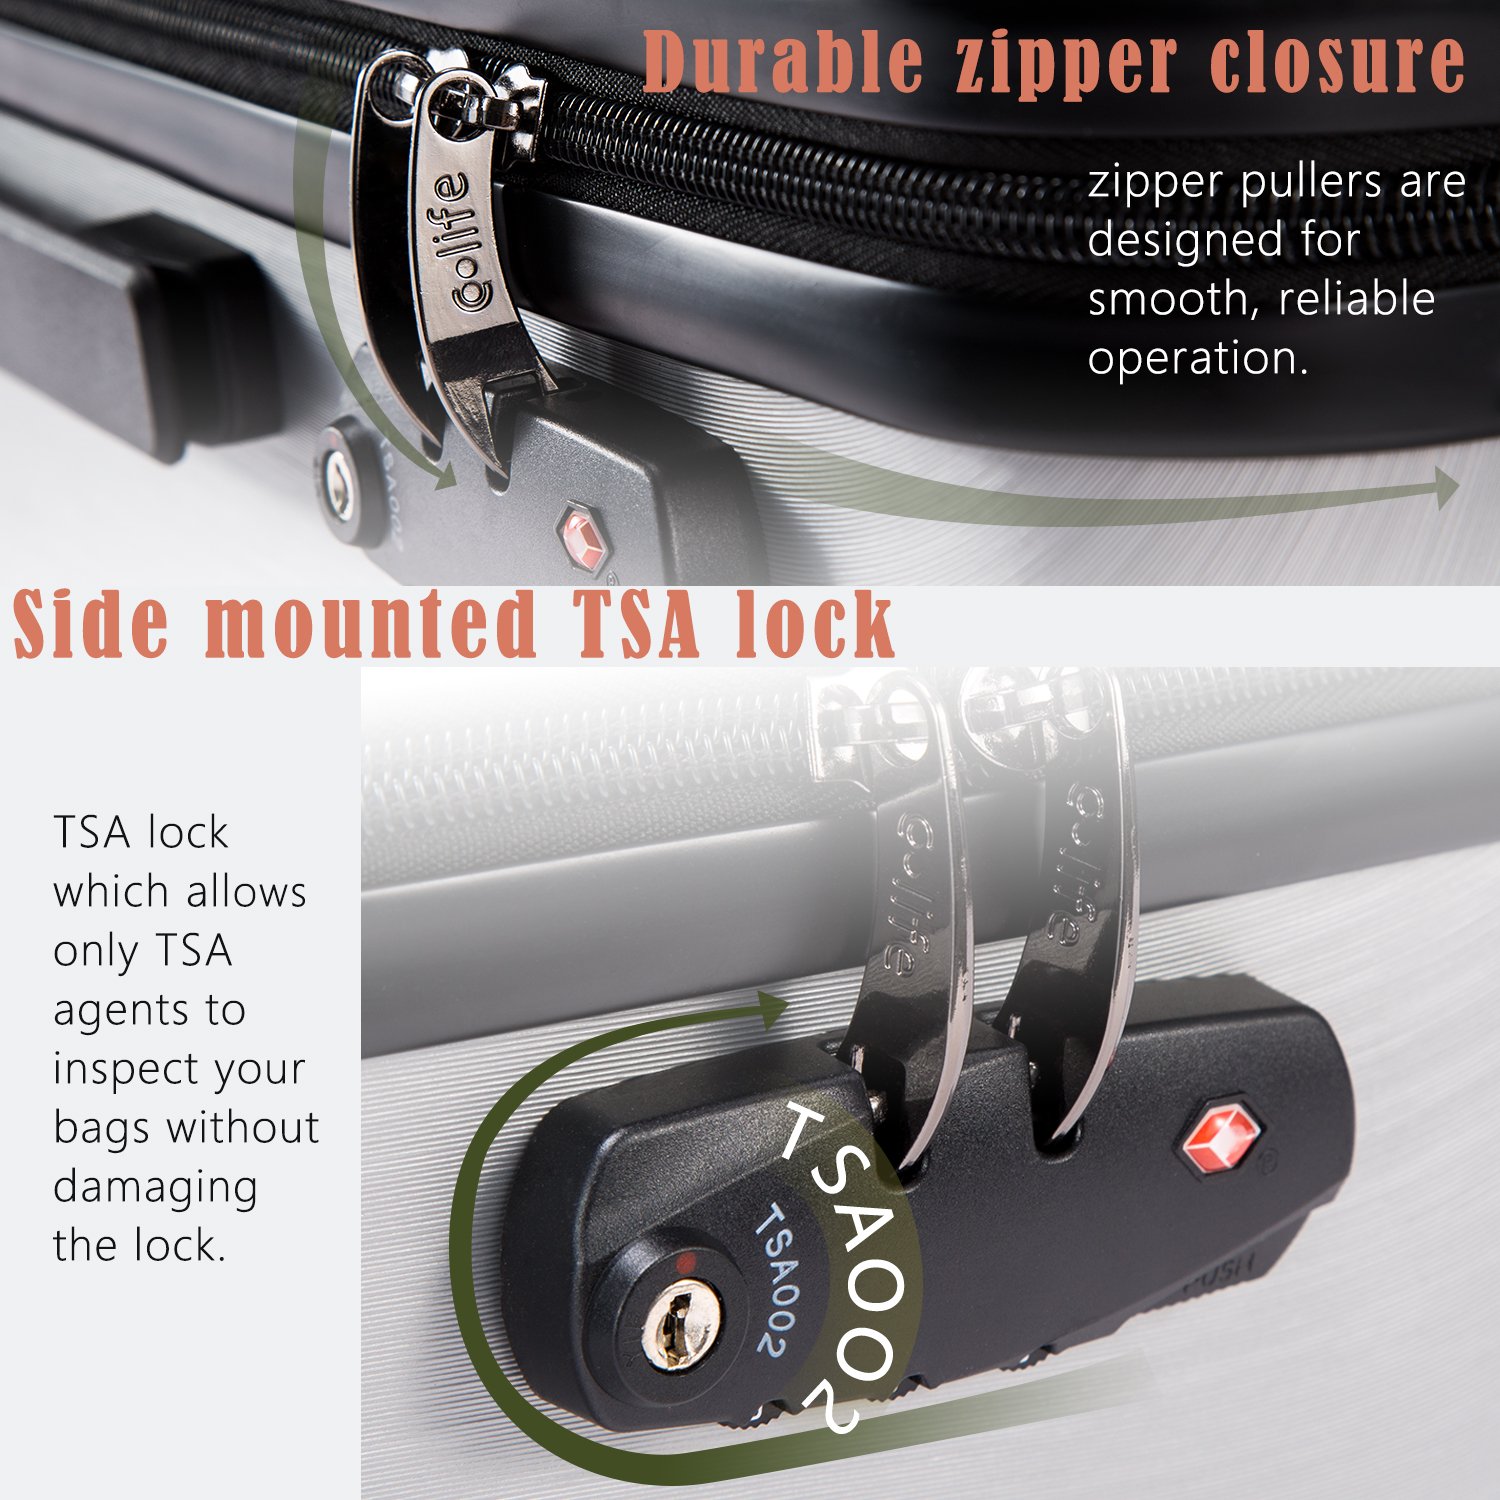 Coolife Luggage Expandable Suitcase PC+ABS 3 Piece Set with TSA Lock Spinner 20in24in28in YD60SET